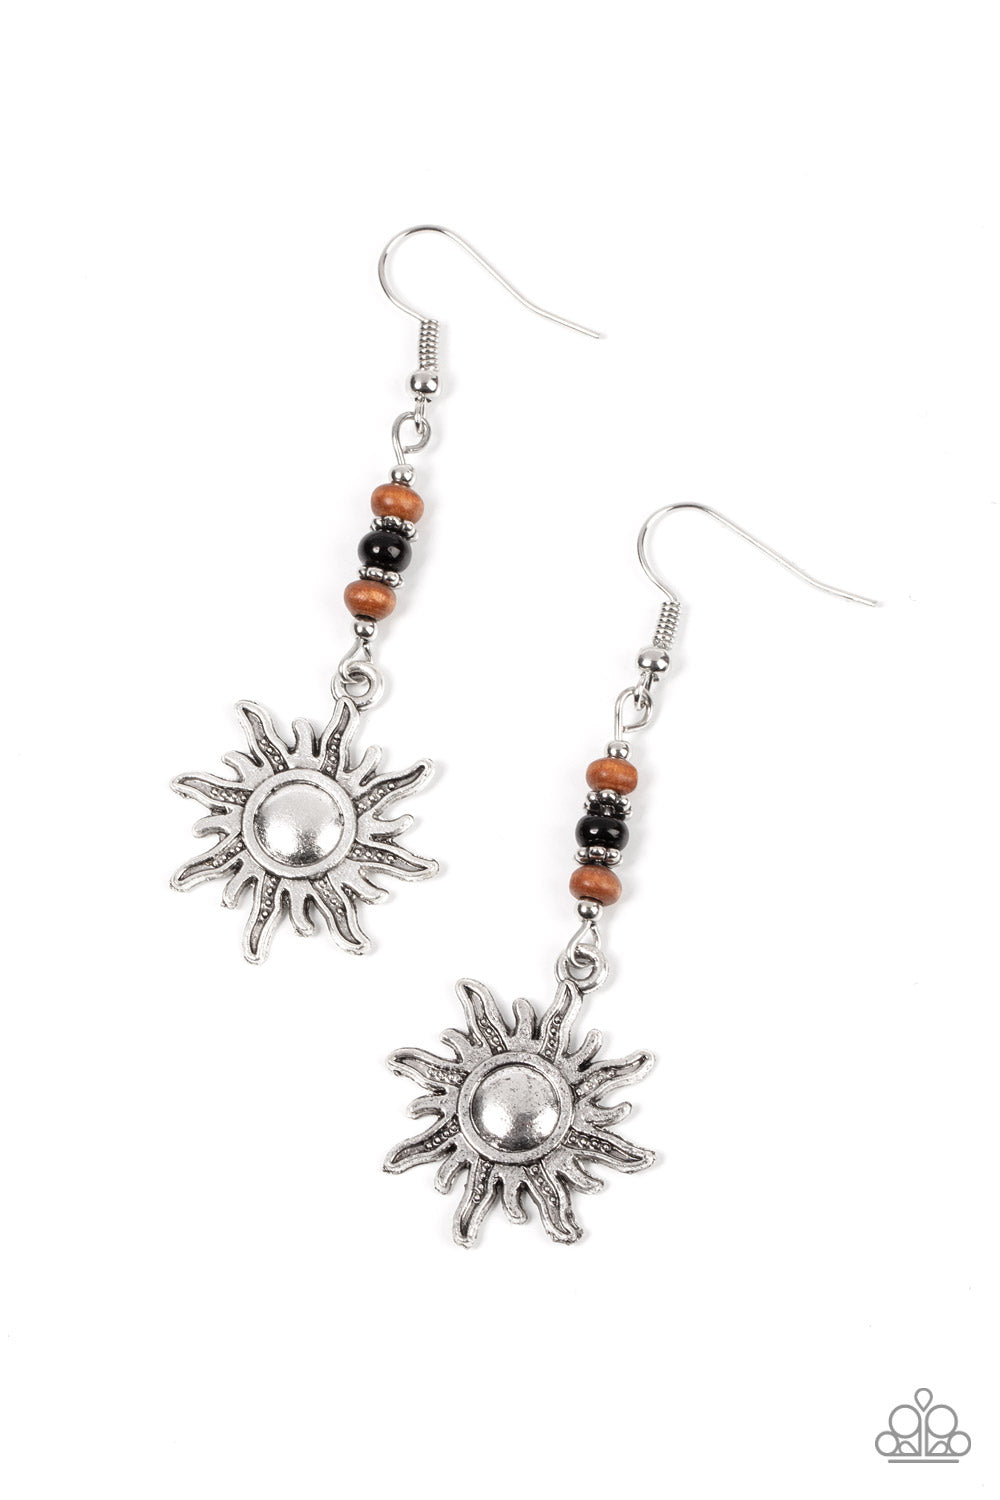 Sunshiny Days Paparazzi Accessories Earrings